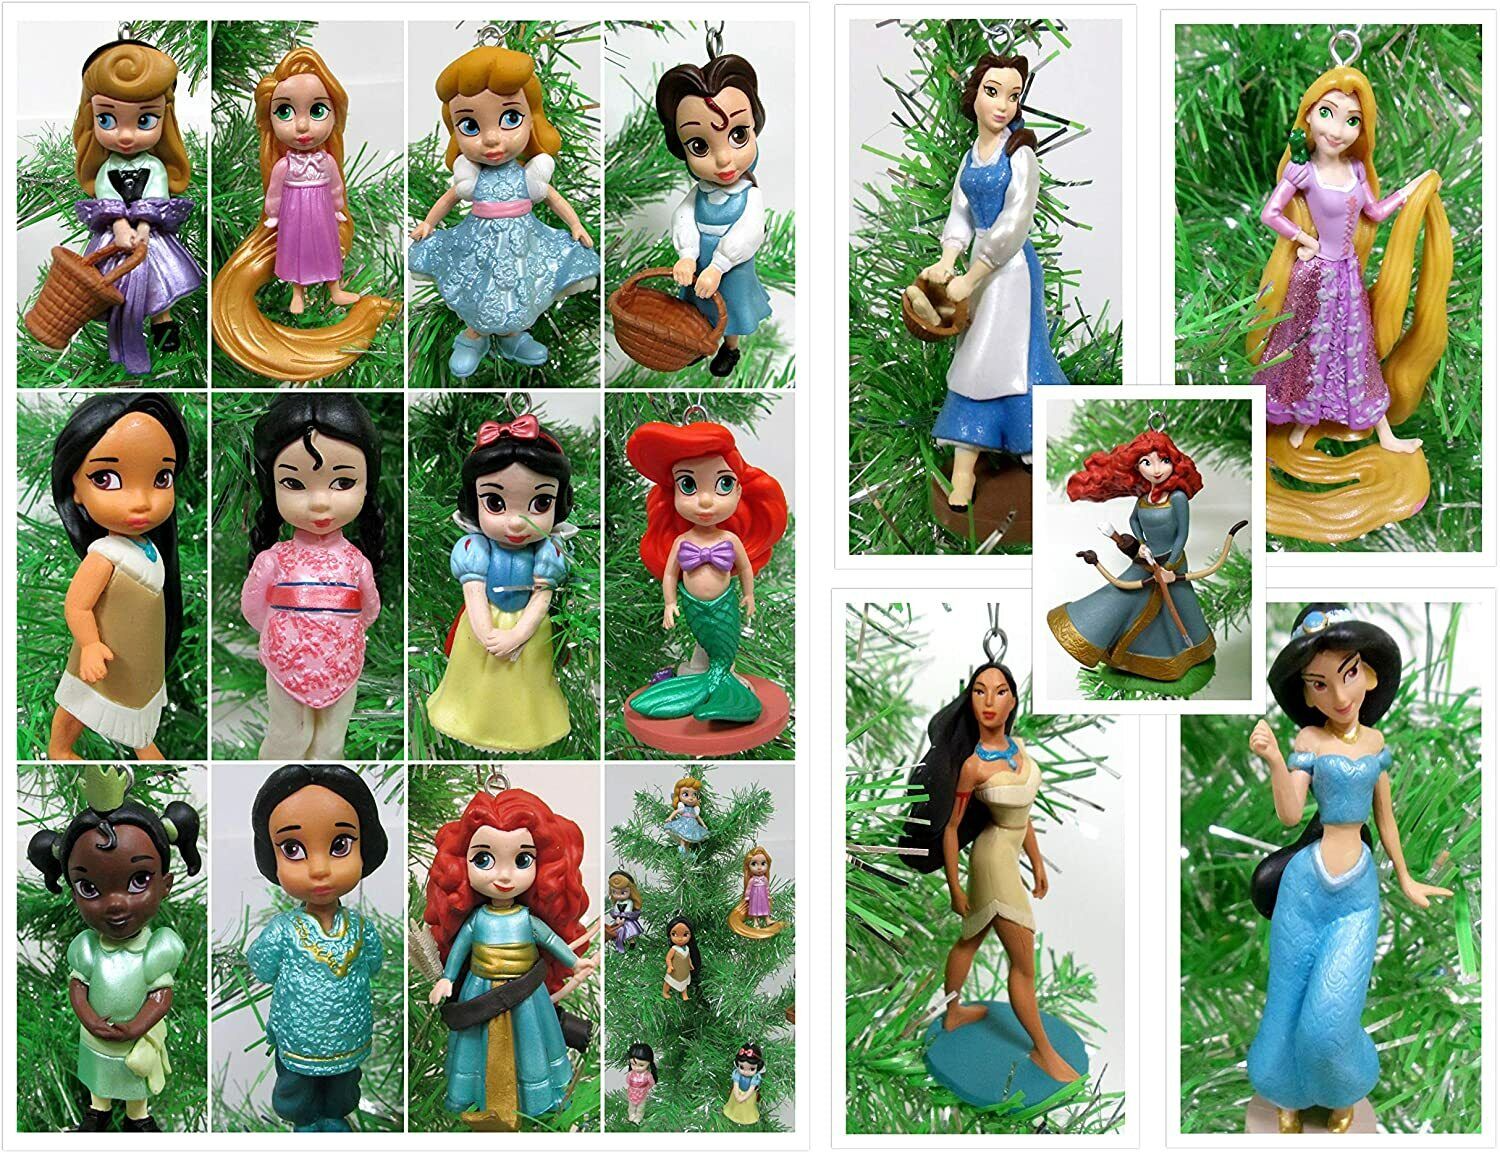 Christmas Ornament Princess Deluxe 12 Piece Set Featuring Random Princesses from